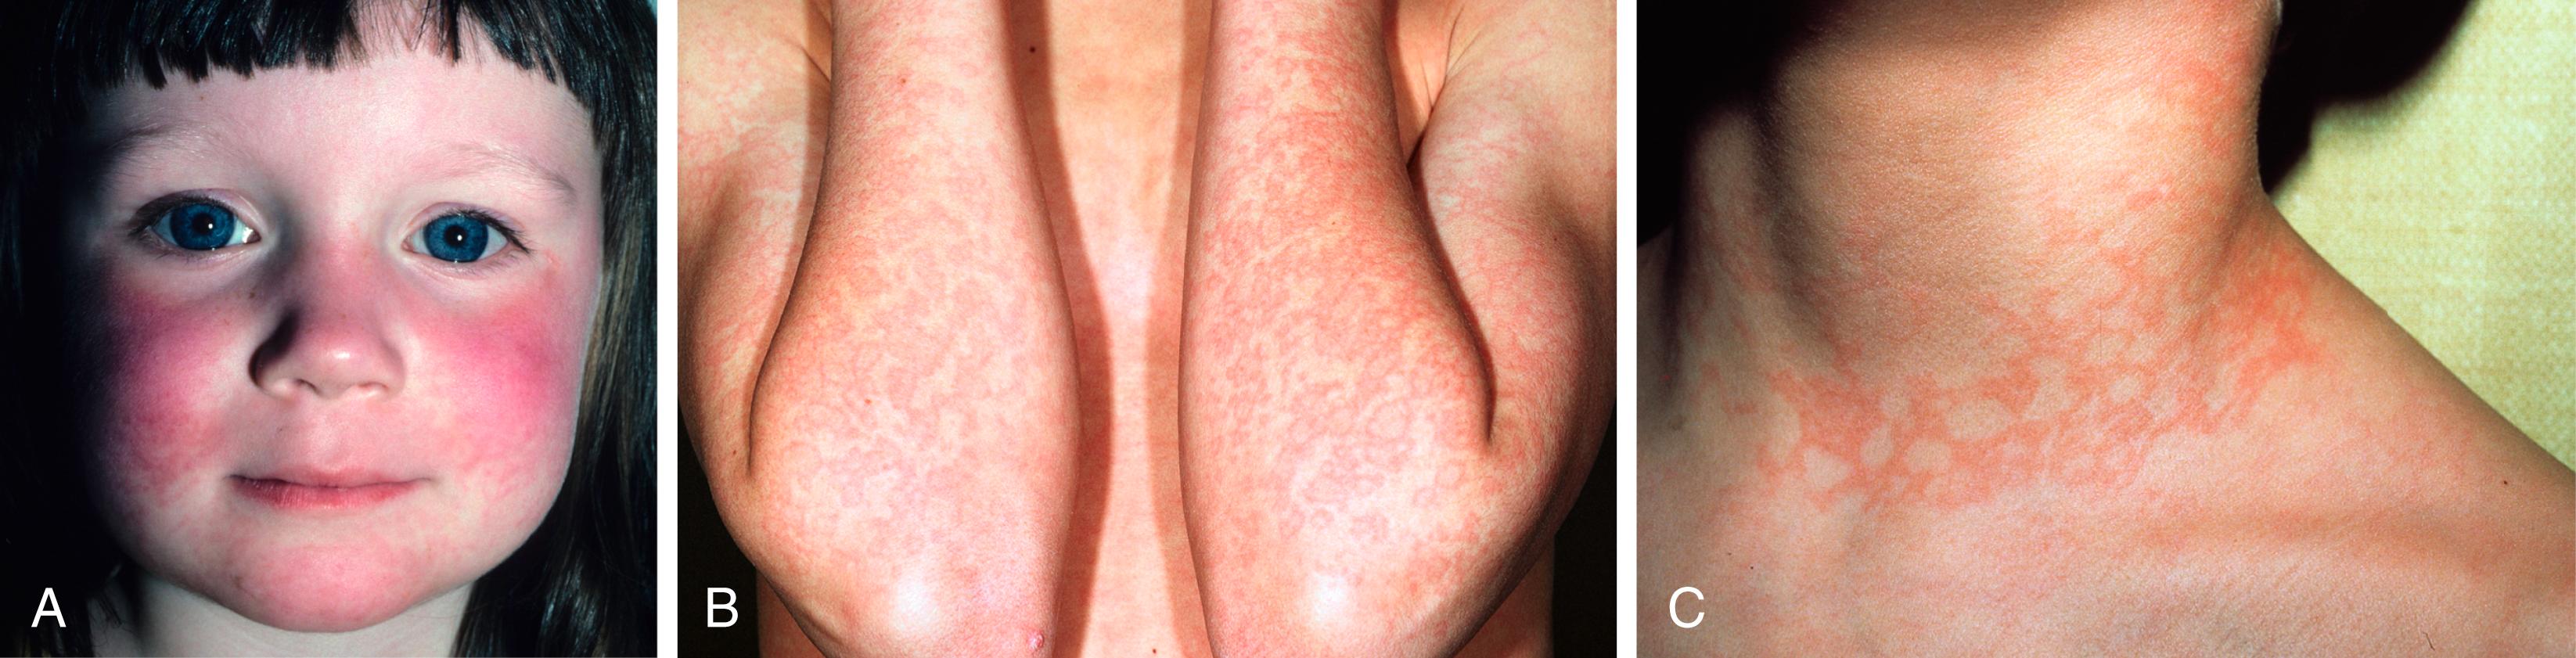 Fig. 53.12, A, Erythema infectiosum. Facial erythema (“slapped cheek”). The red plaque covers the cheek and spares the nasolabial fold and the circumoral region. B, A macular eruption appears on the extensor extremities. C, The eruption fades into a lacy netlike pattern.